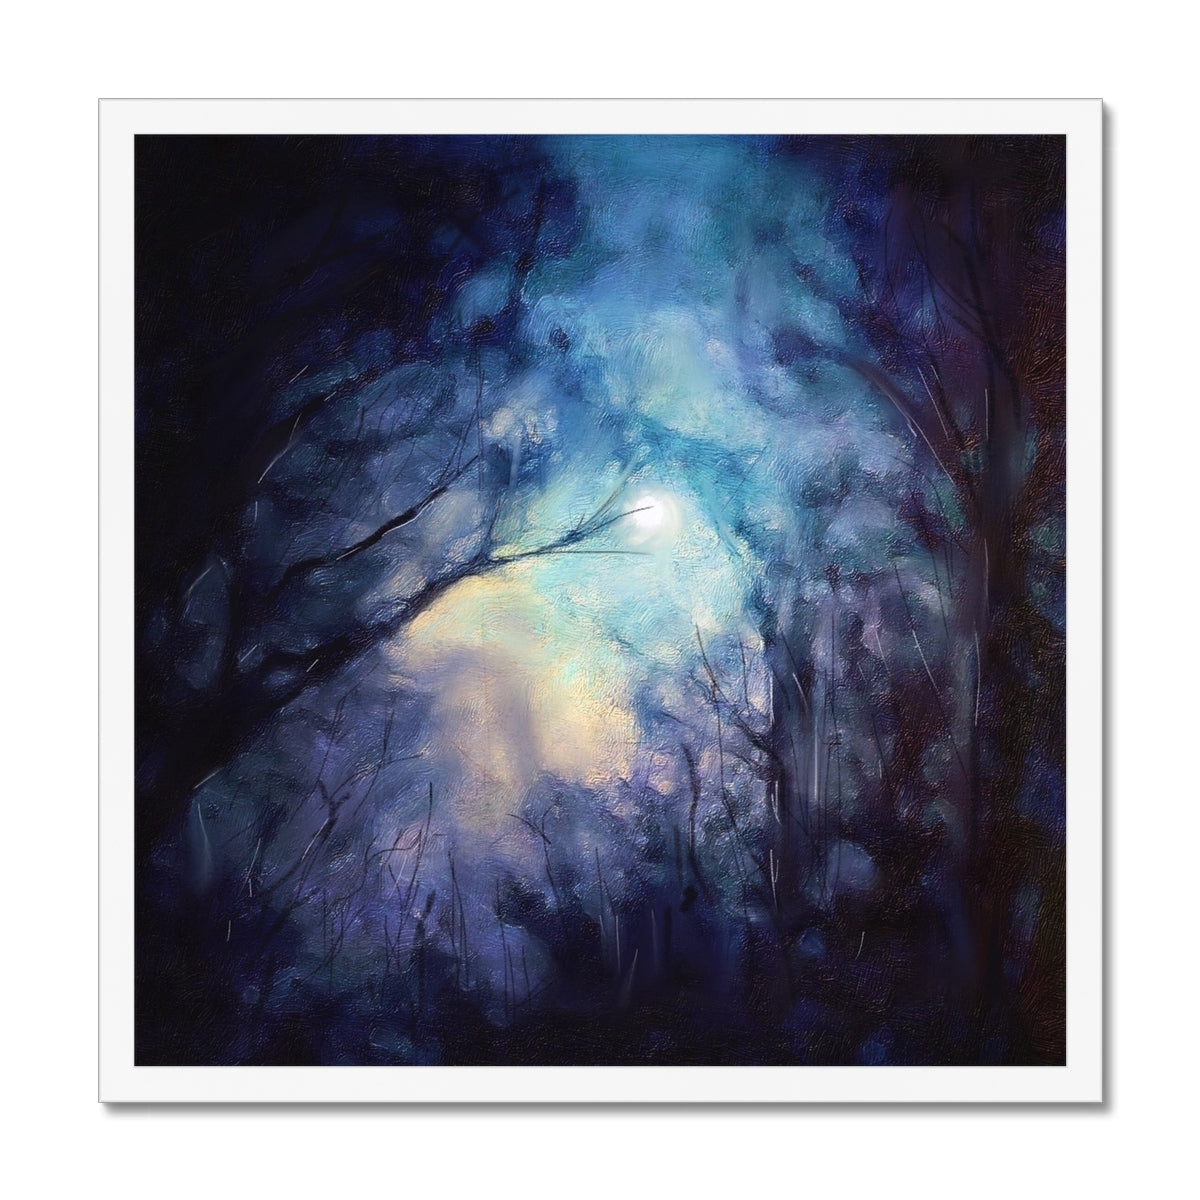 A Moonlit Highland Wood Painting | Framed Prints From Scotland-Framed Prints-Scottish Highlands & Lowlands Art Gallery-20"x20"-White Frame-Paintings, Prints, Homeware, Art Gifts From Scotland By Scottish Artist Kevin Hunter